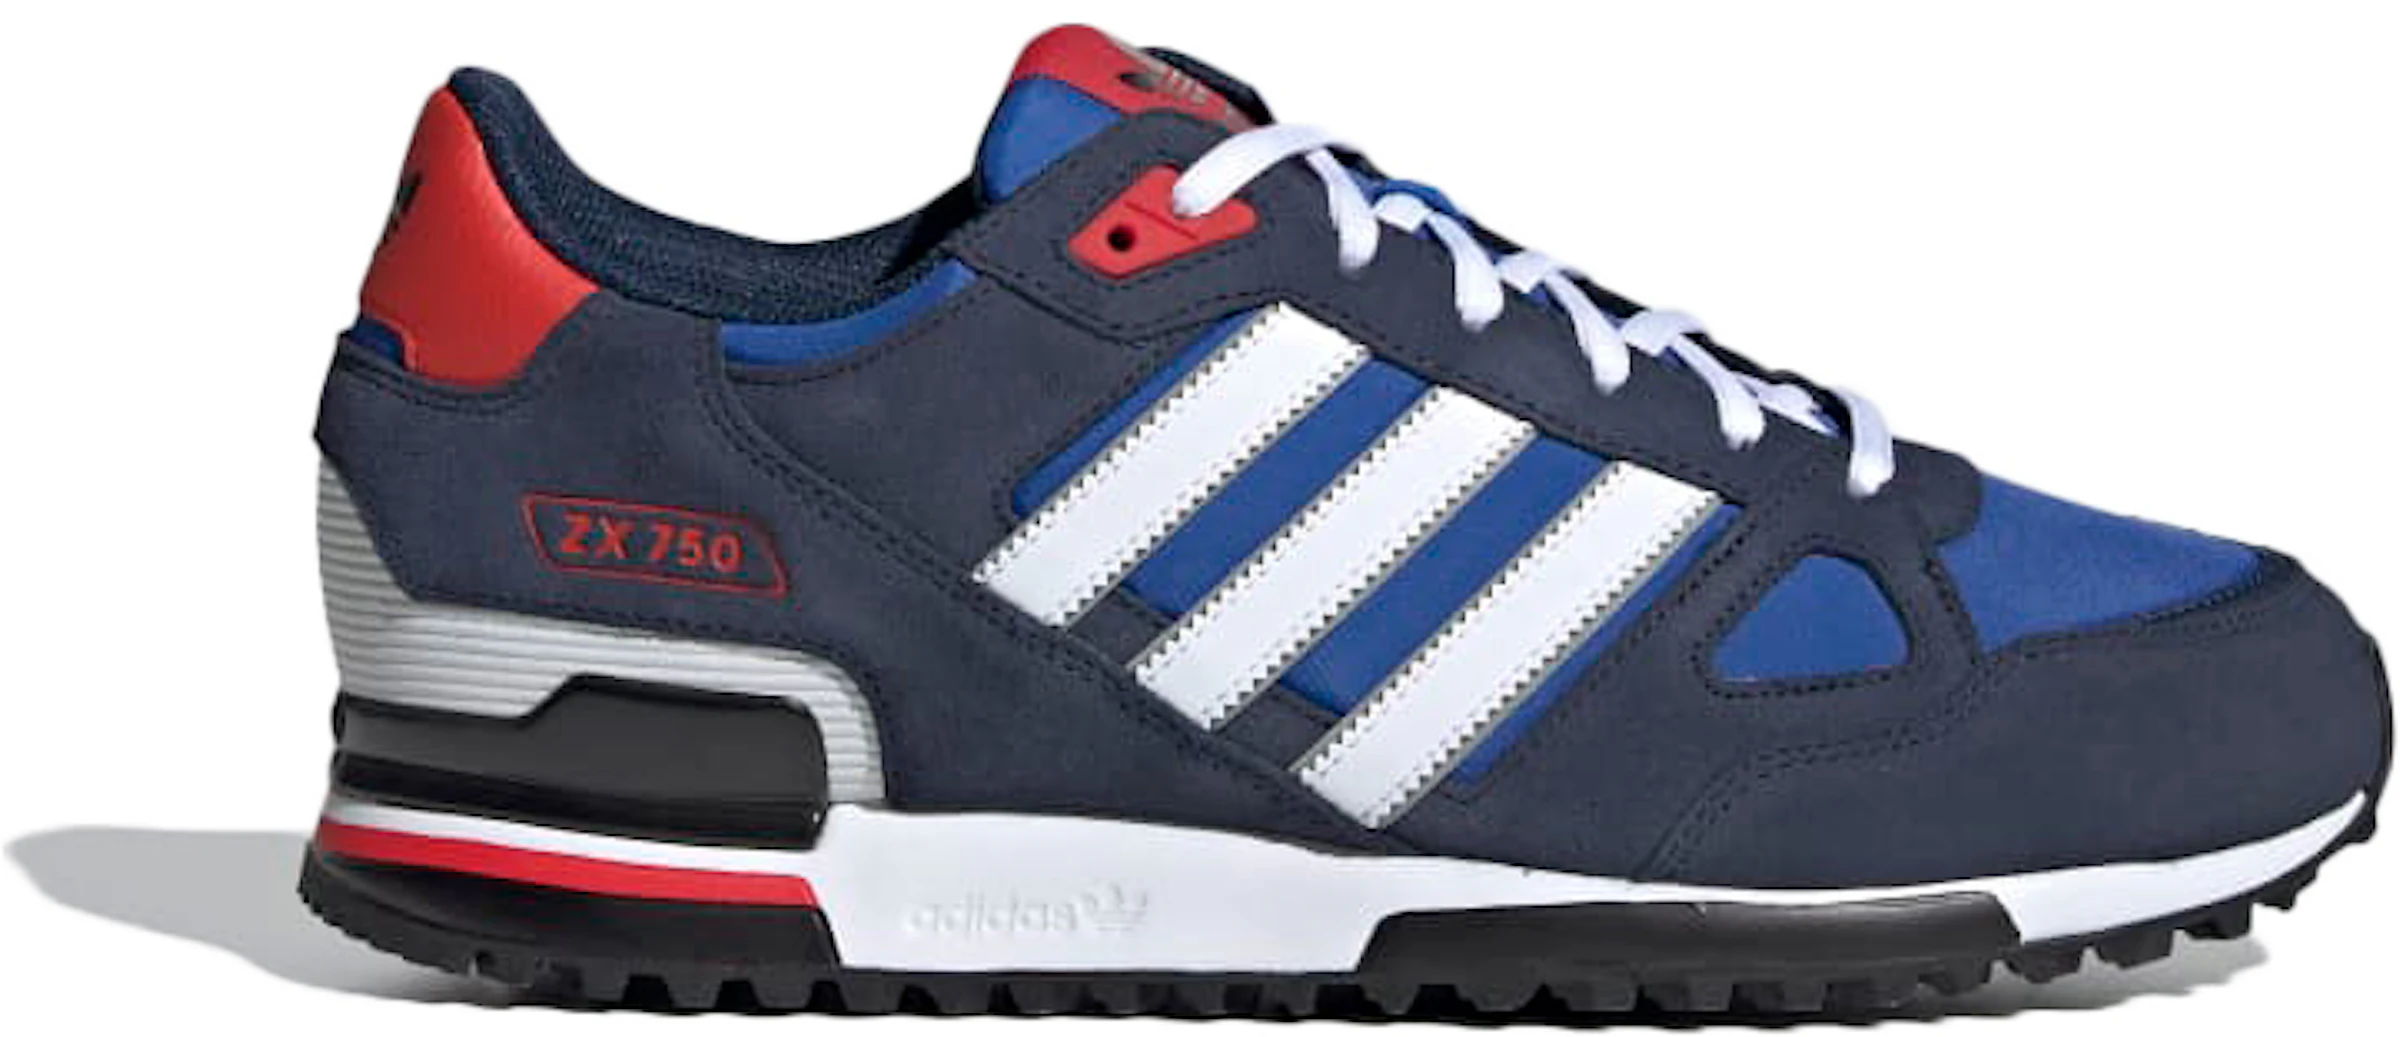 ZX 750 Red - - US